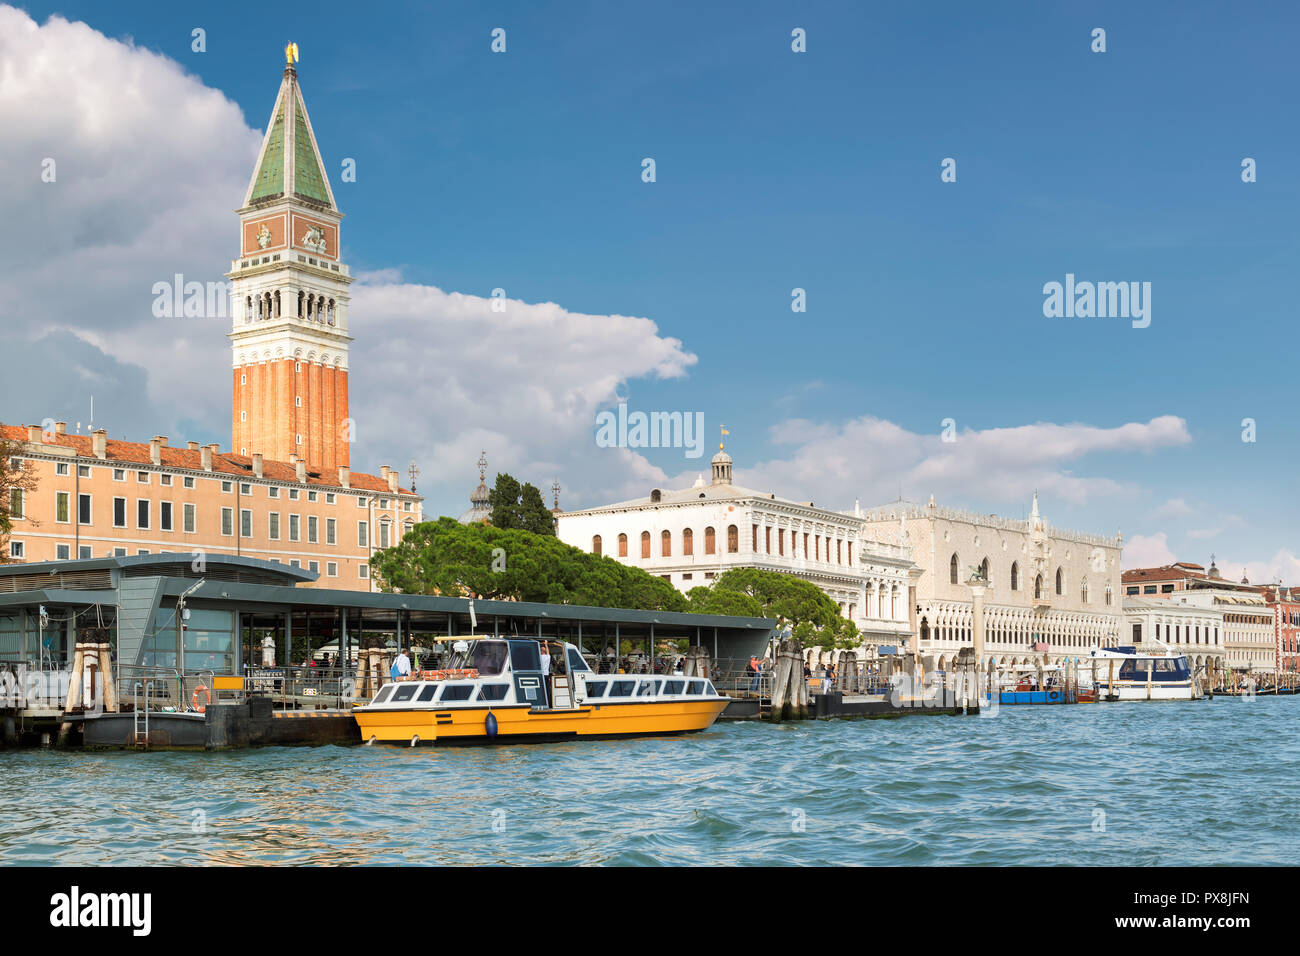 Grand canal - Piazza San Marco, Venice, Italy. Stock Photo